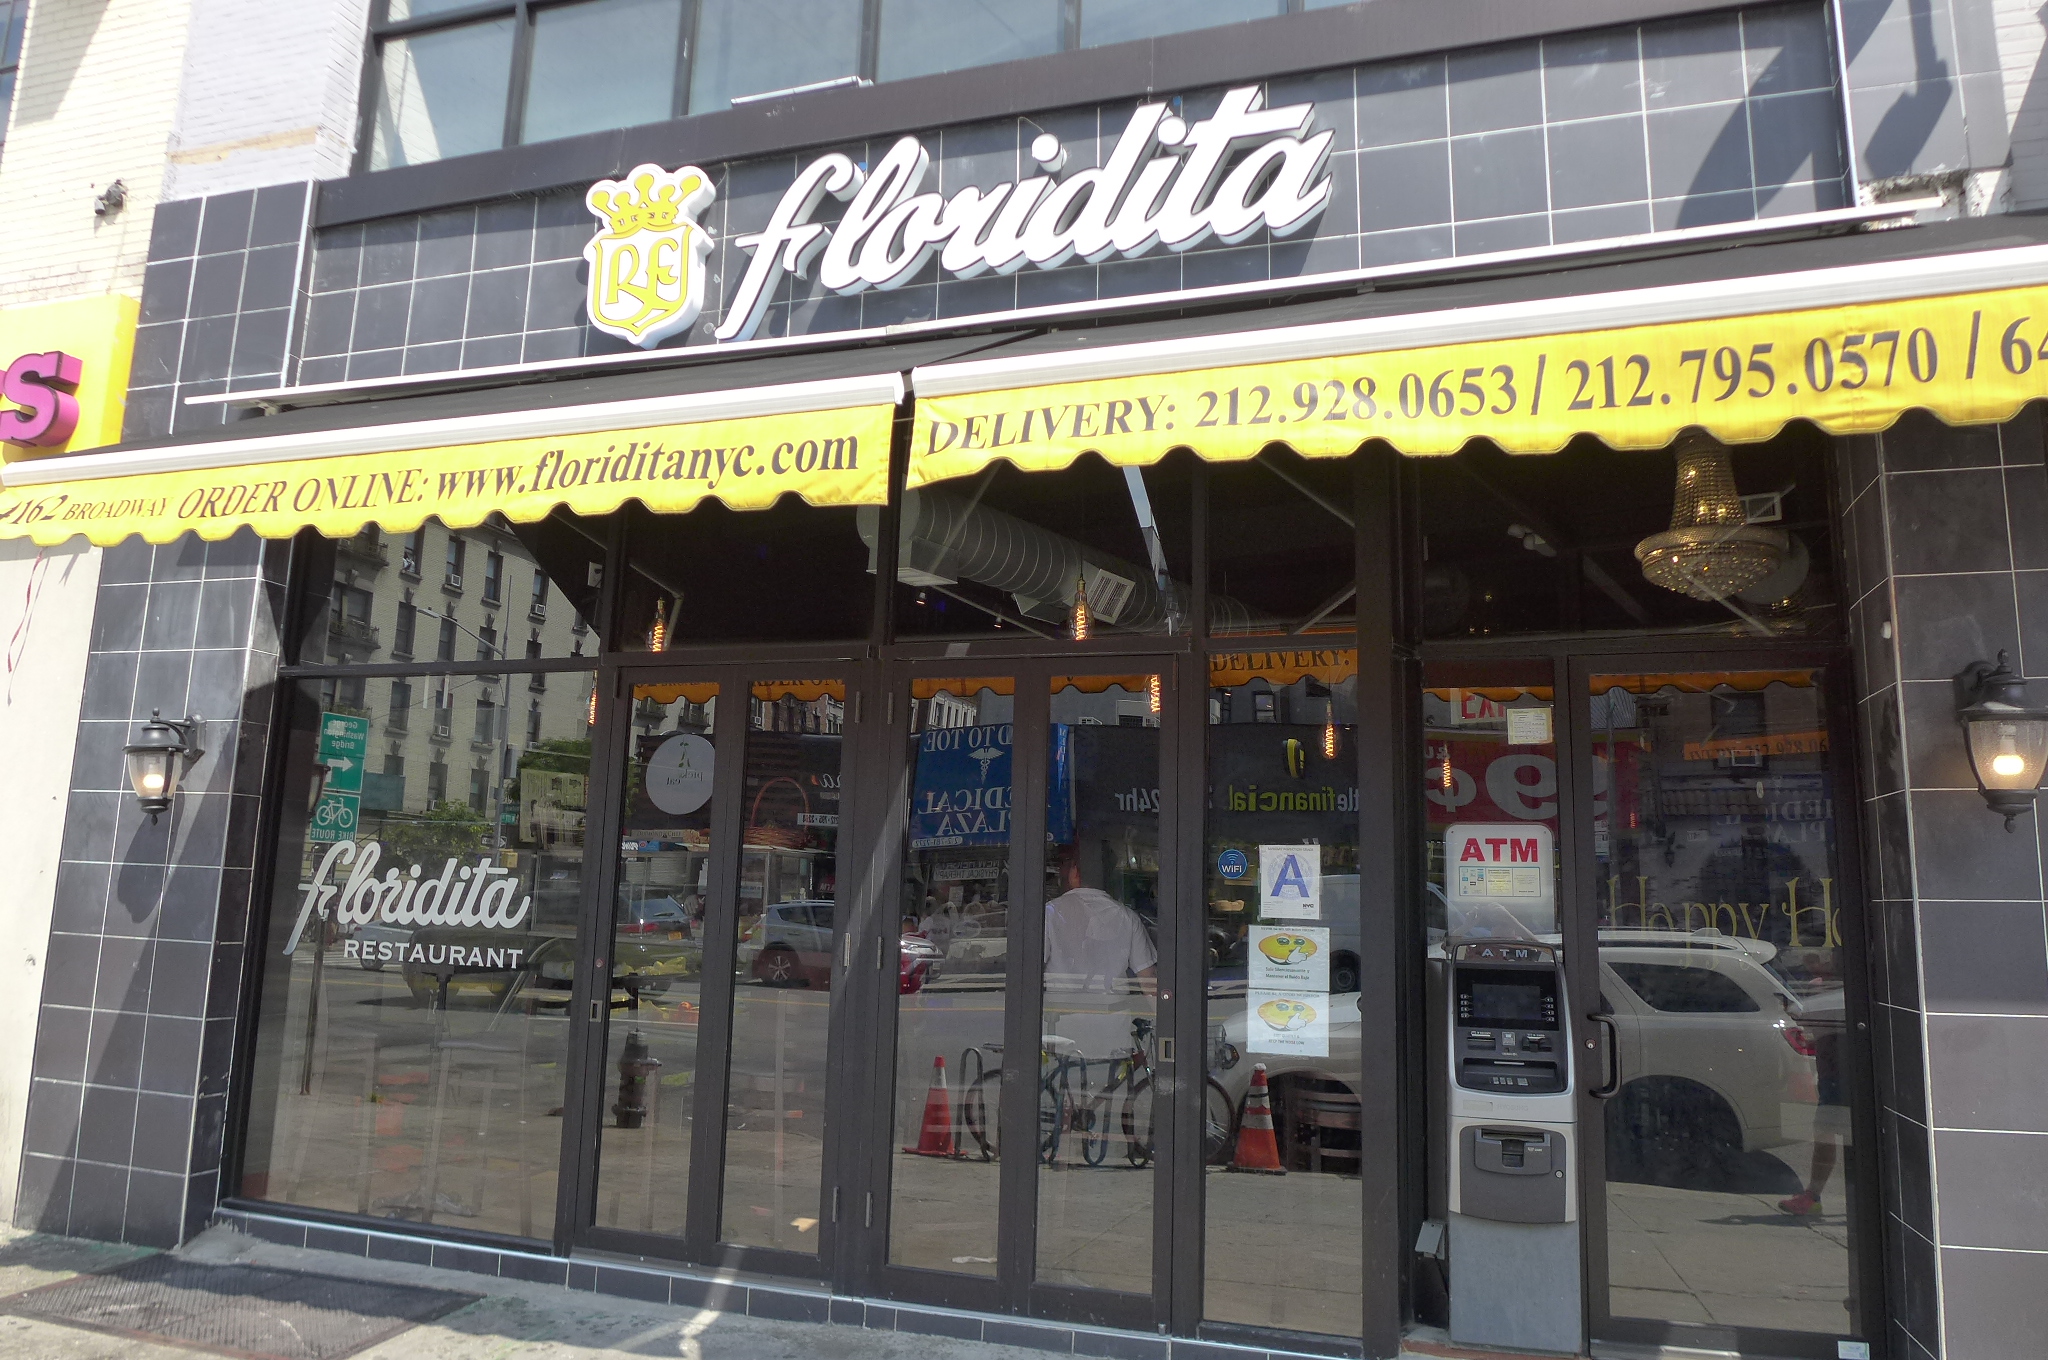 A black facade with a coat of arms and Floridita in cursive.